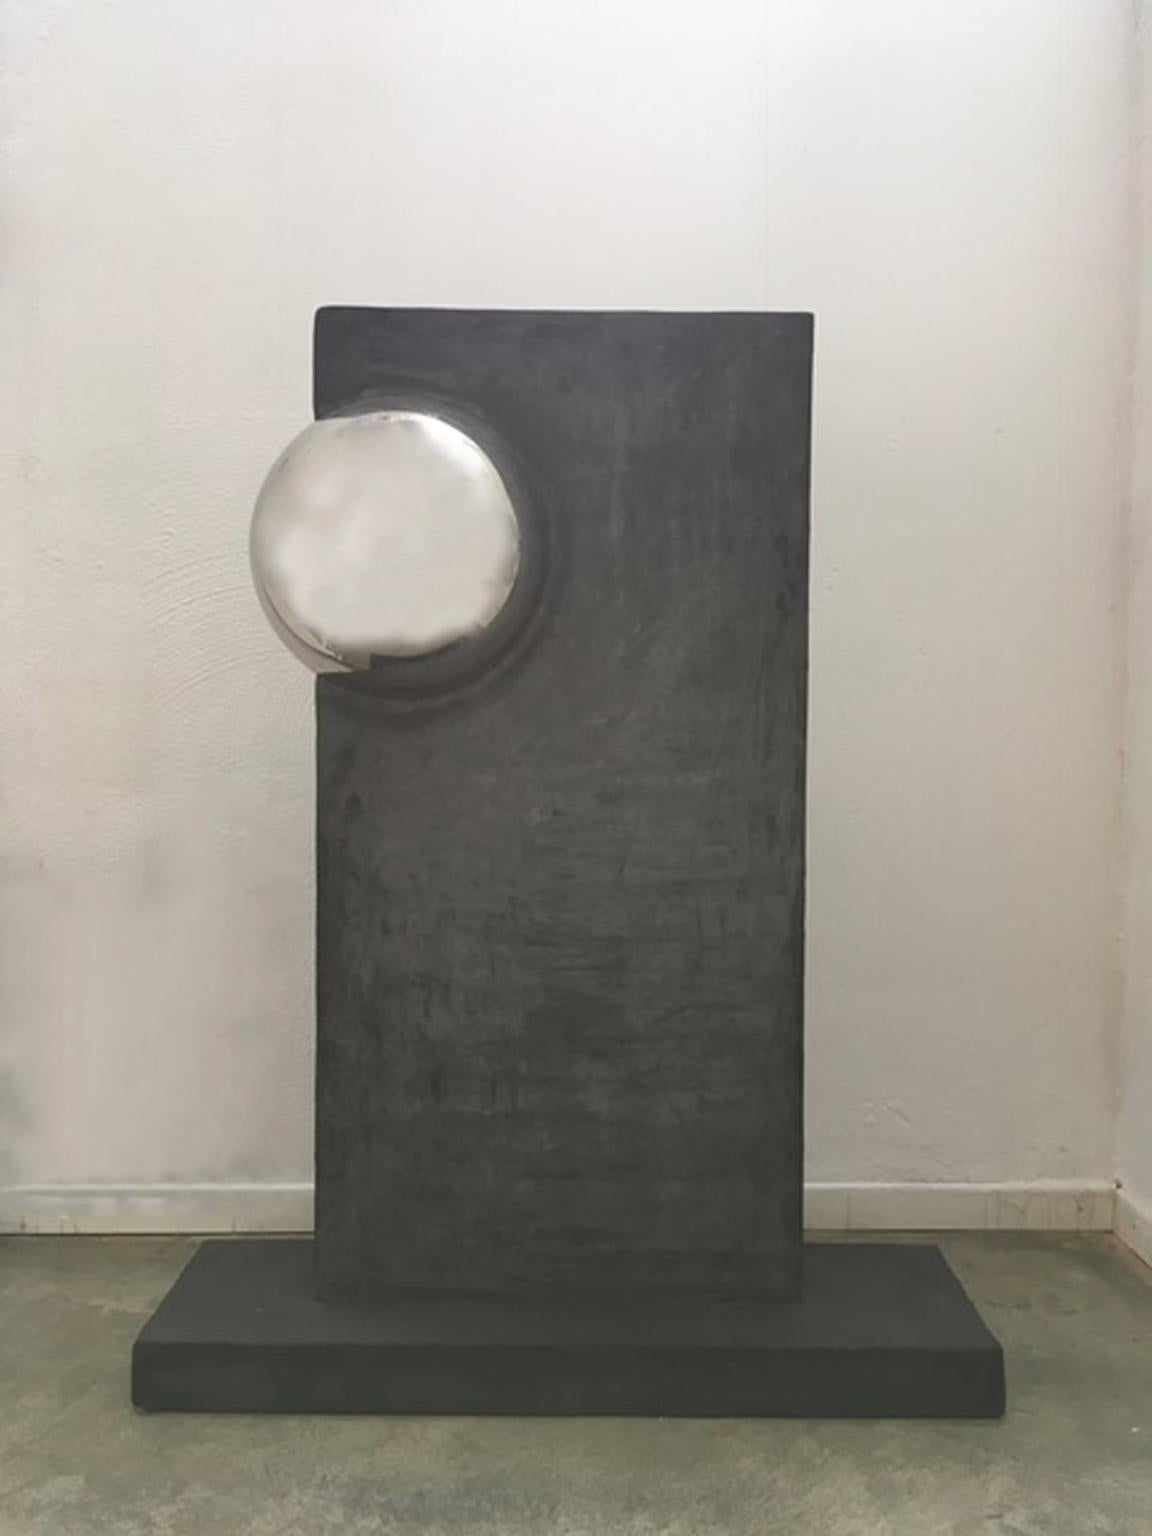 Stele with sphere Italy 2000 Polyester Grey Colored Mortar with Chrome Sphere